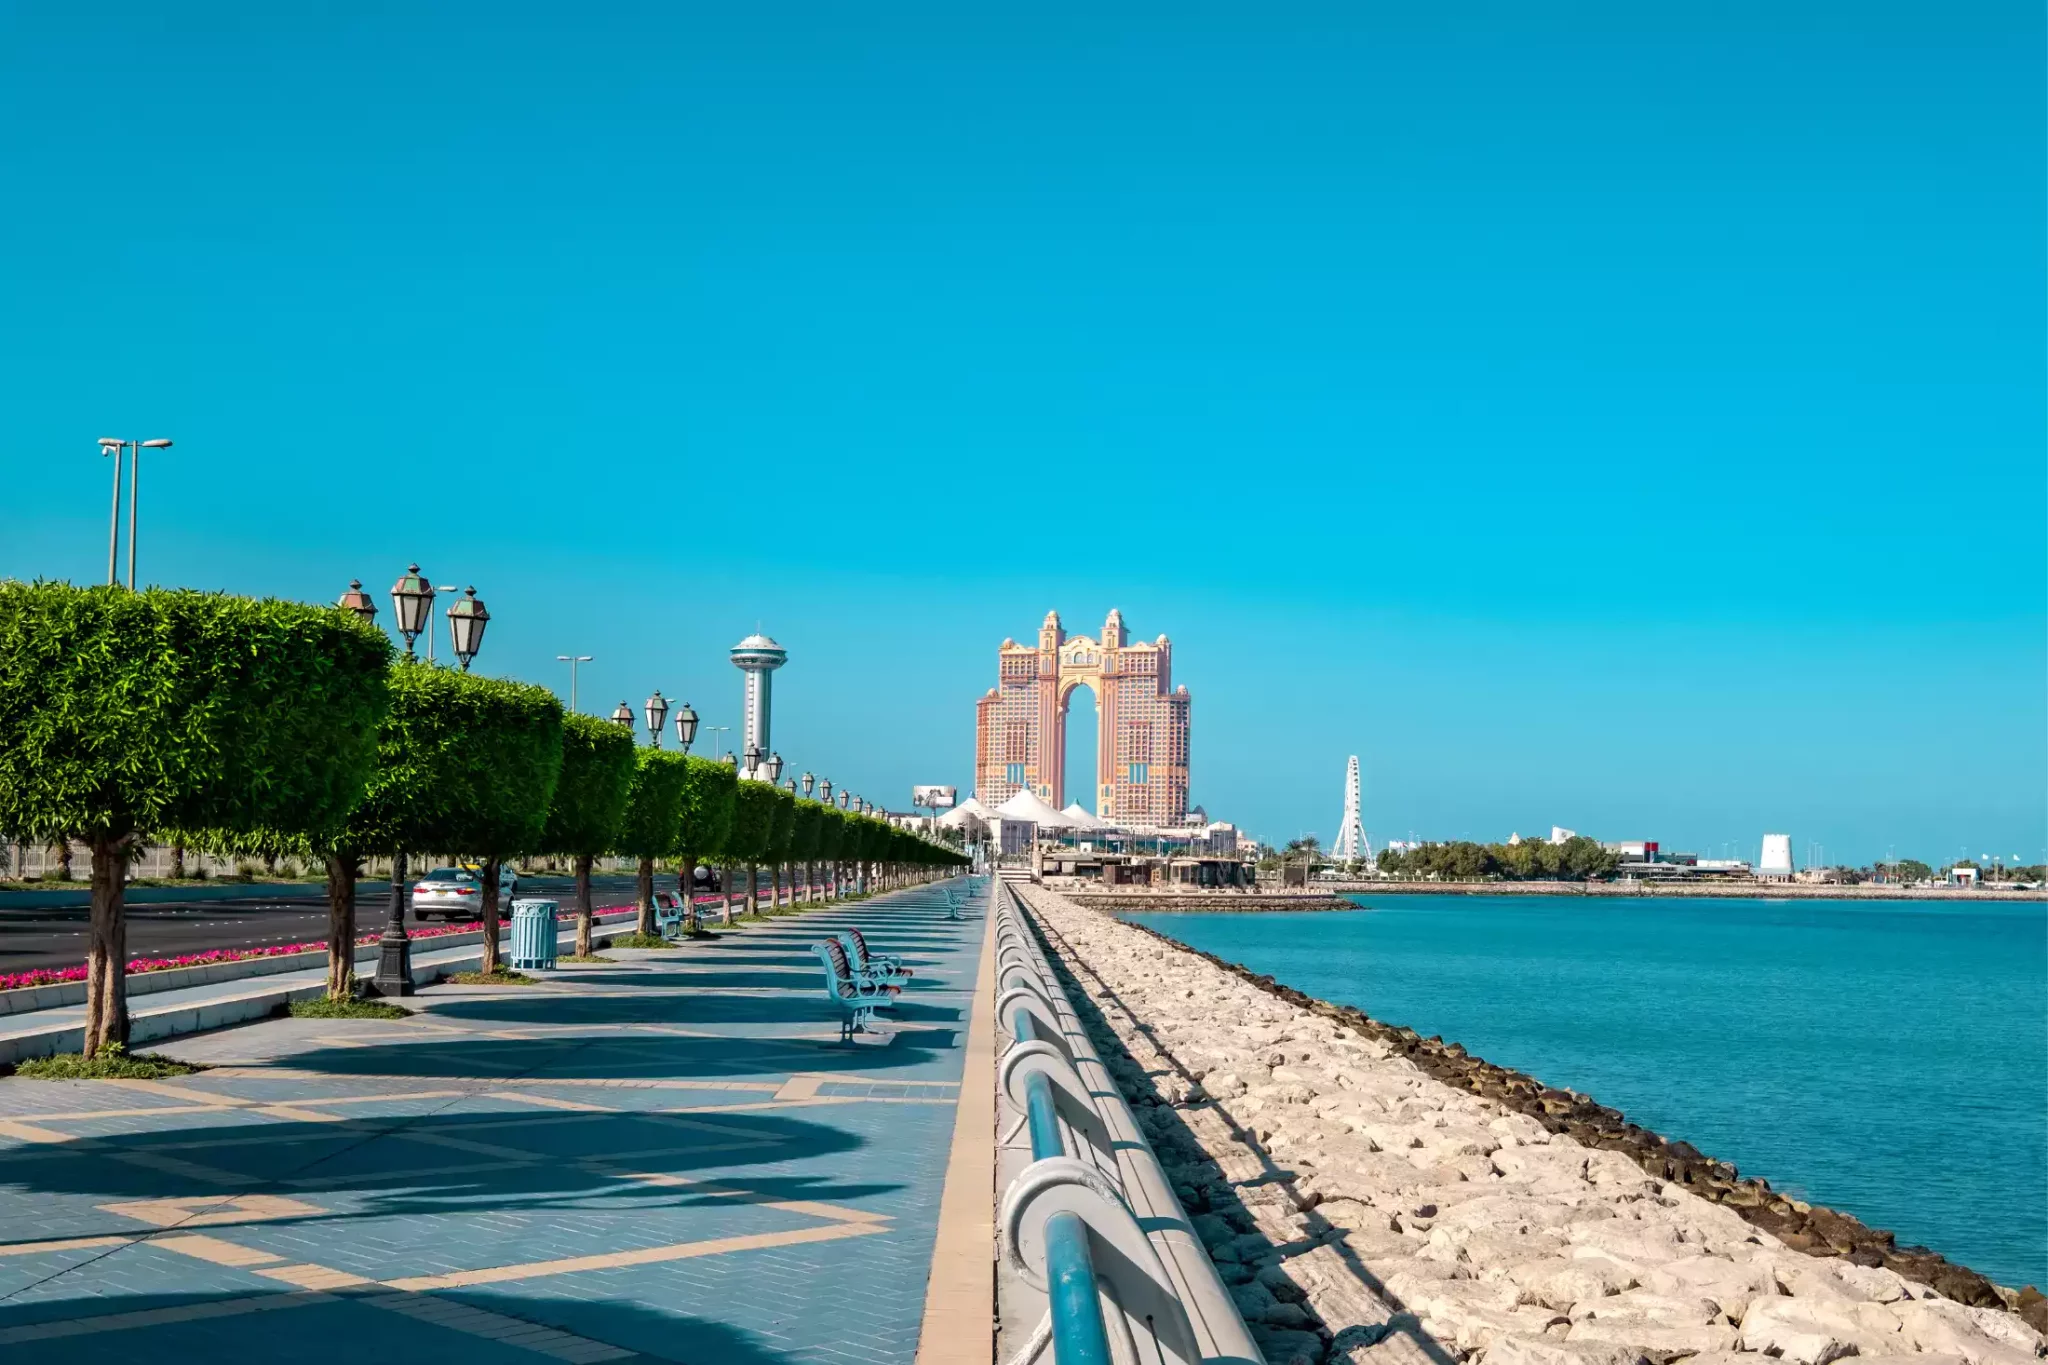 A pedestrian walkway along the sea in Corniche, one of the parks in Abu Dhabi.